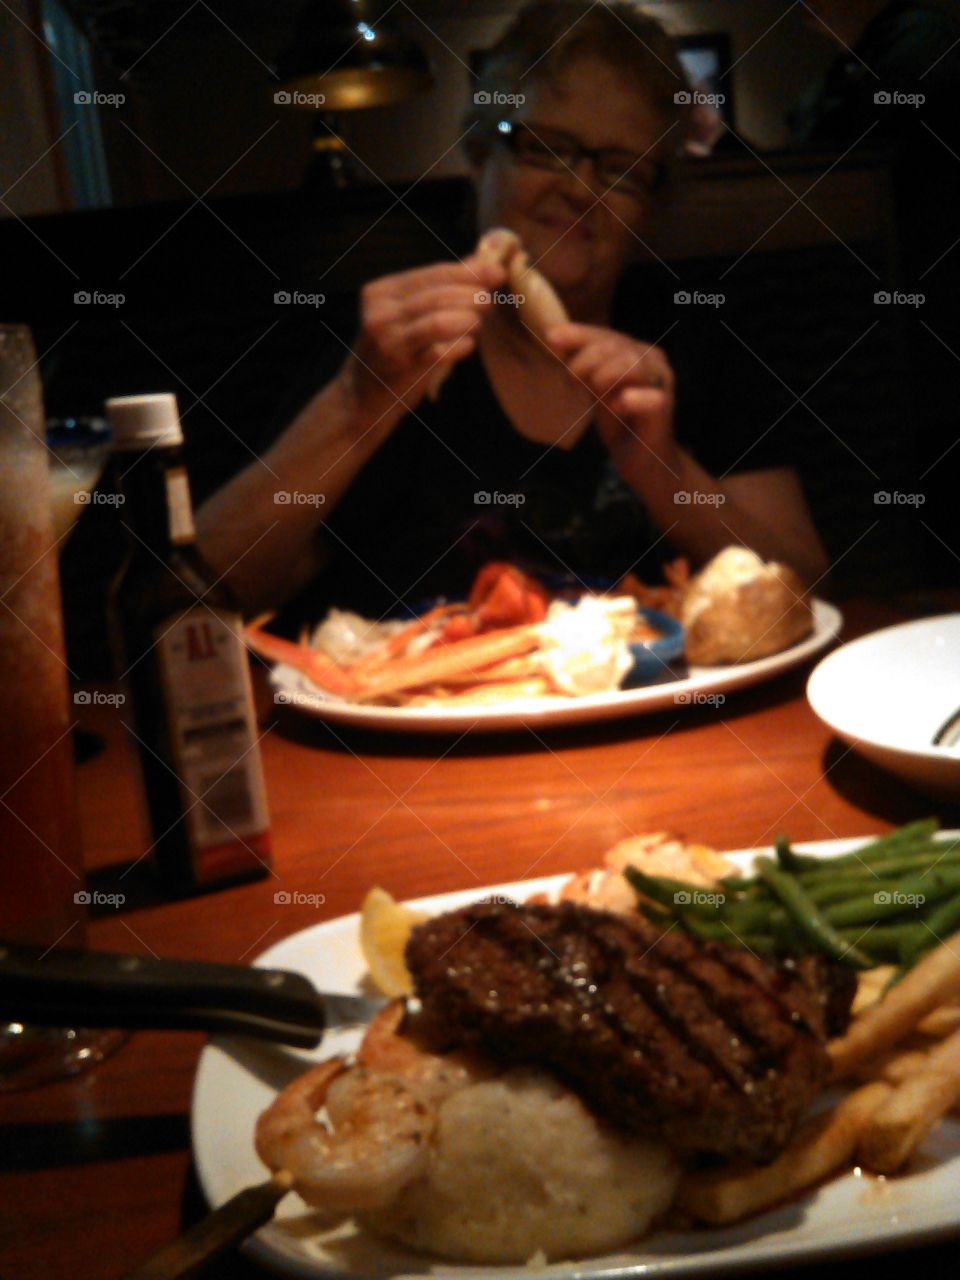 Dinner with Mom. Took my mom out for dinner at Red Lobster :-)